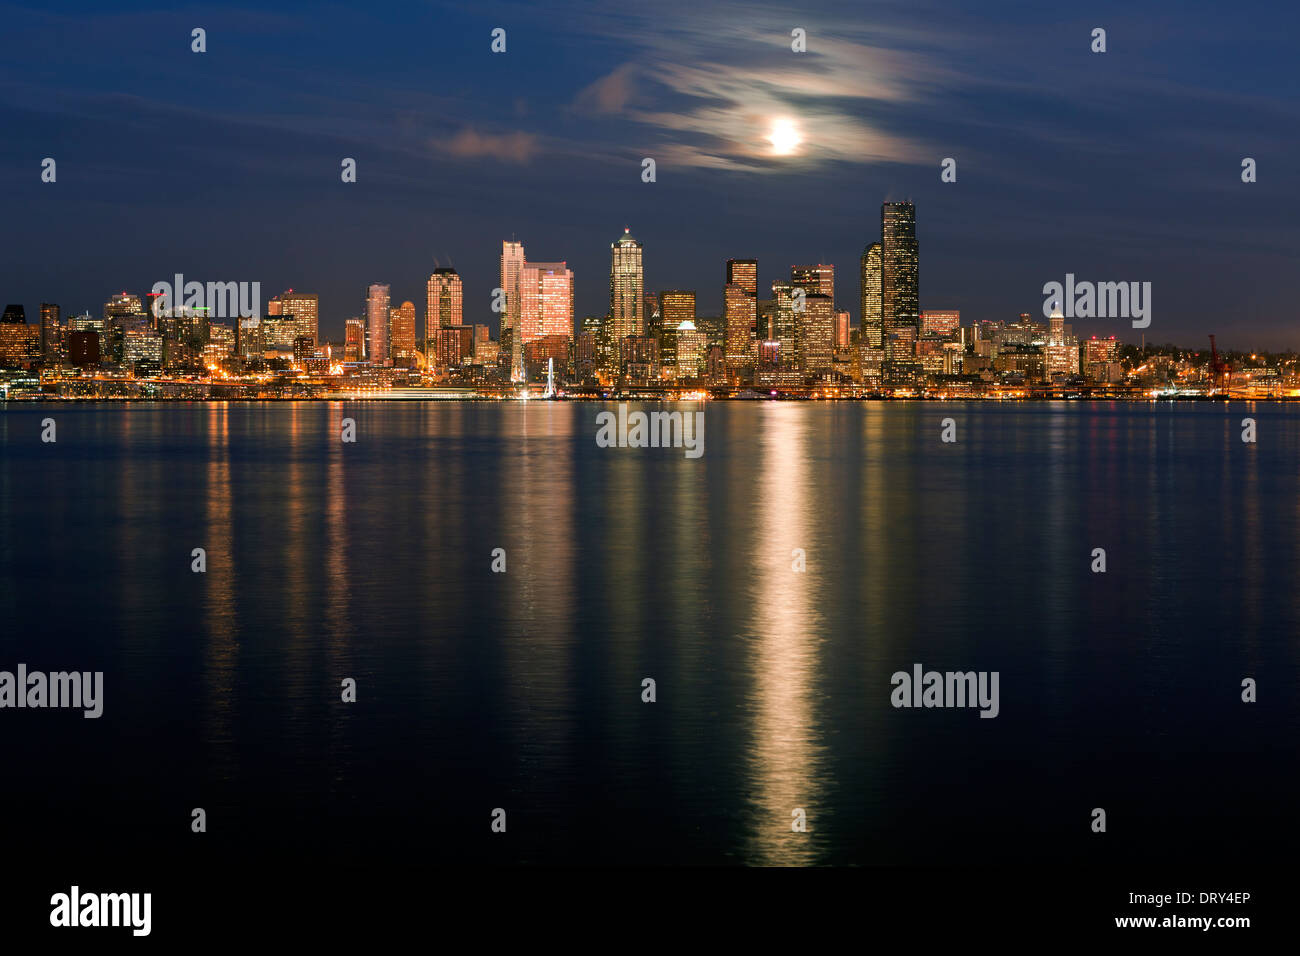 WA09439-00...WASHINGTON - Moon rise over the city of Seattle viewed from across Elliot Bay from West Seattle. 2013 Stock Photo